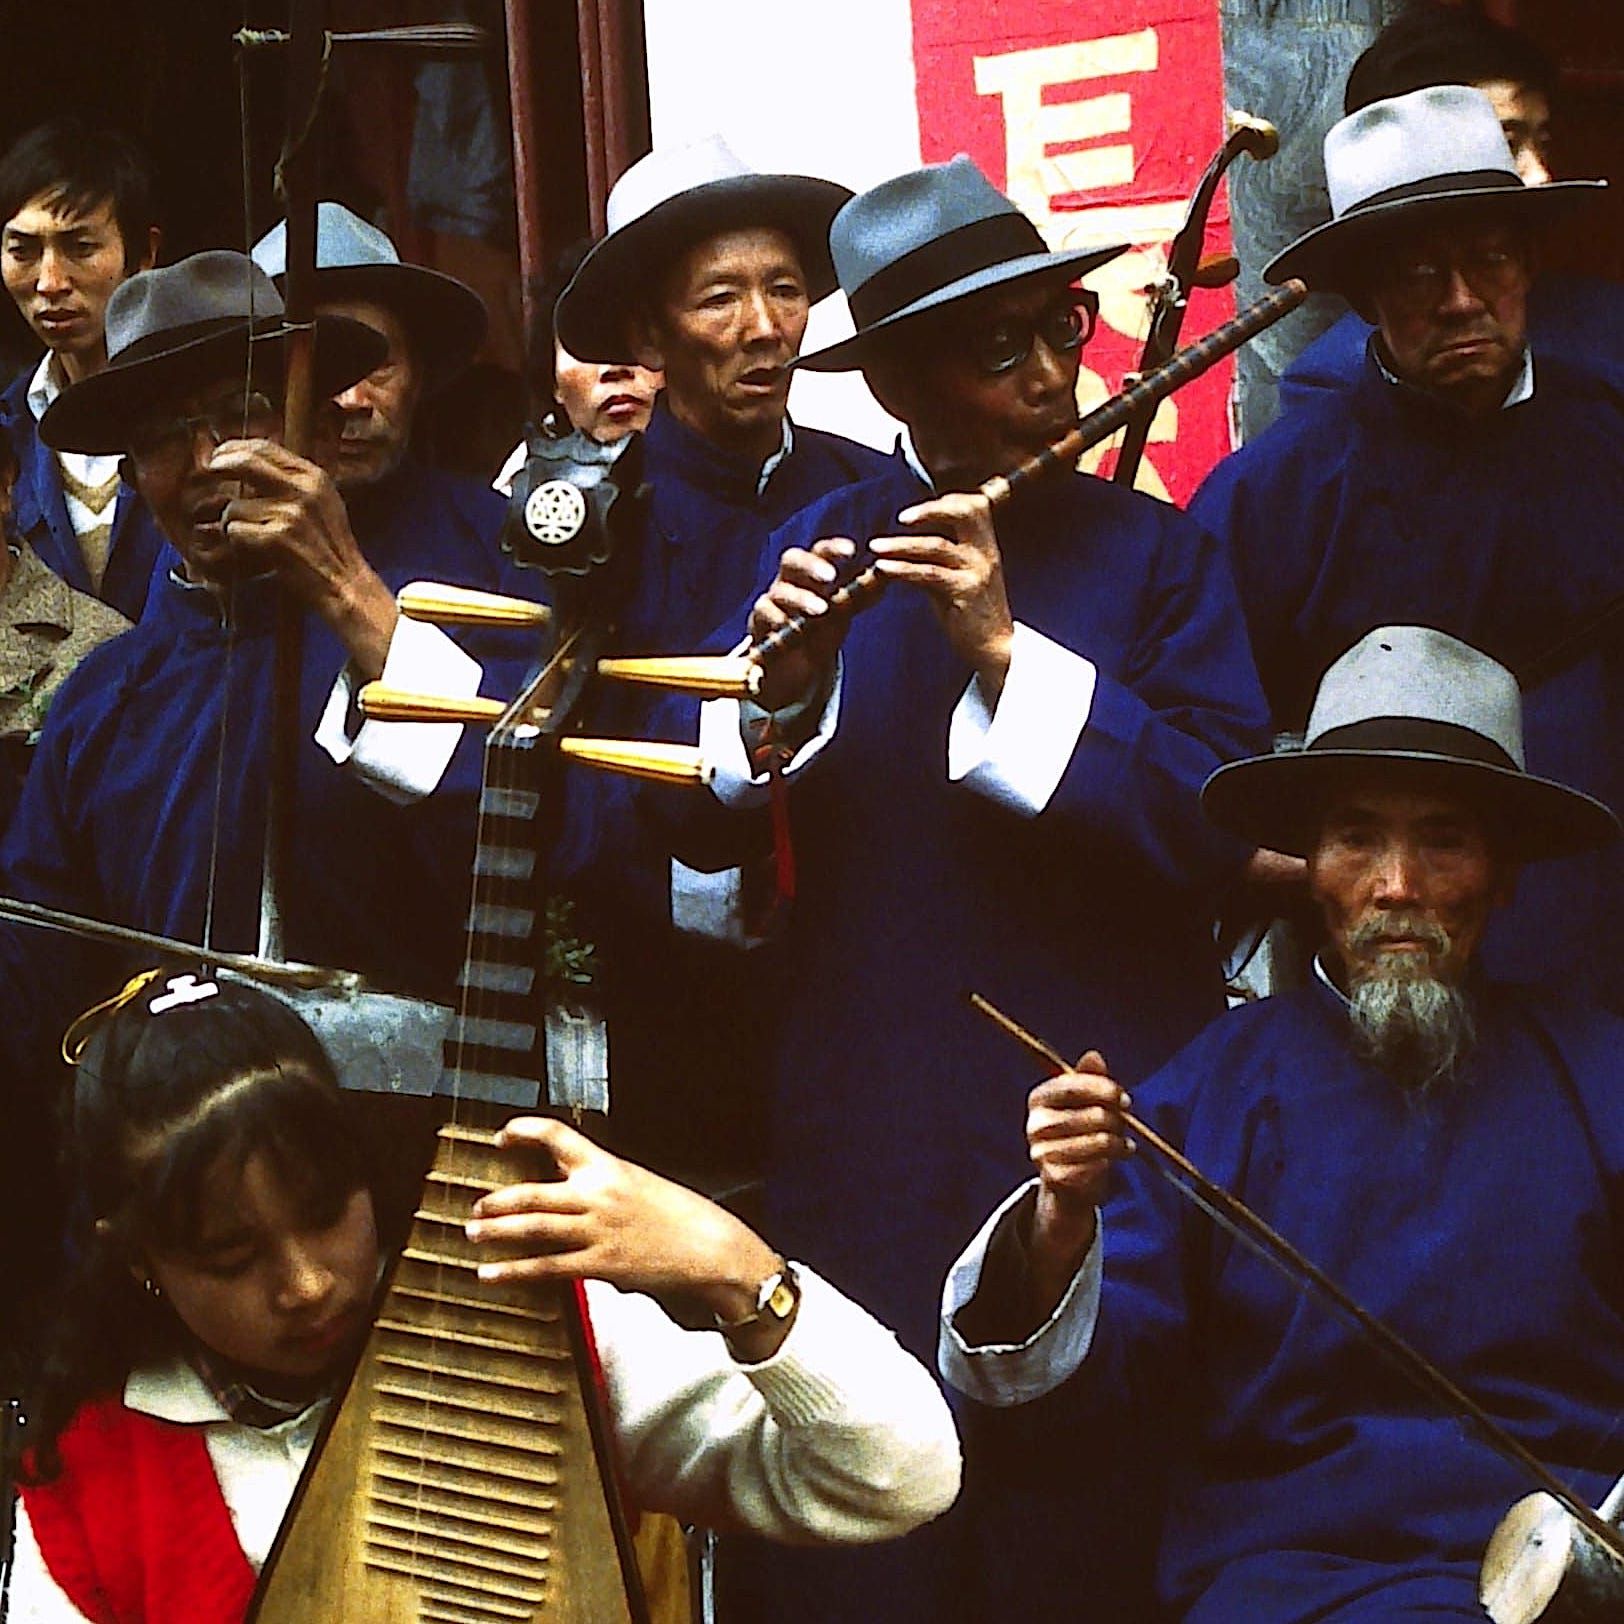 Chinese musicians.